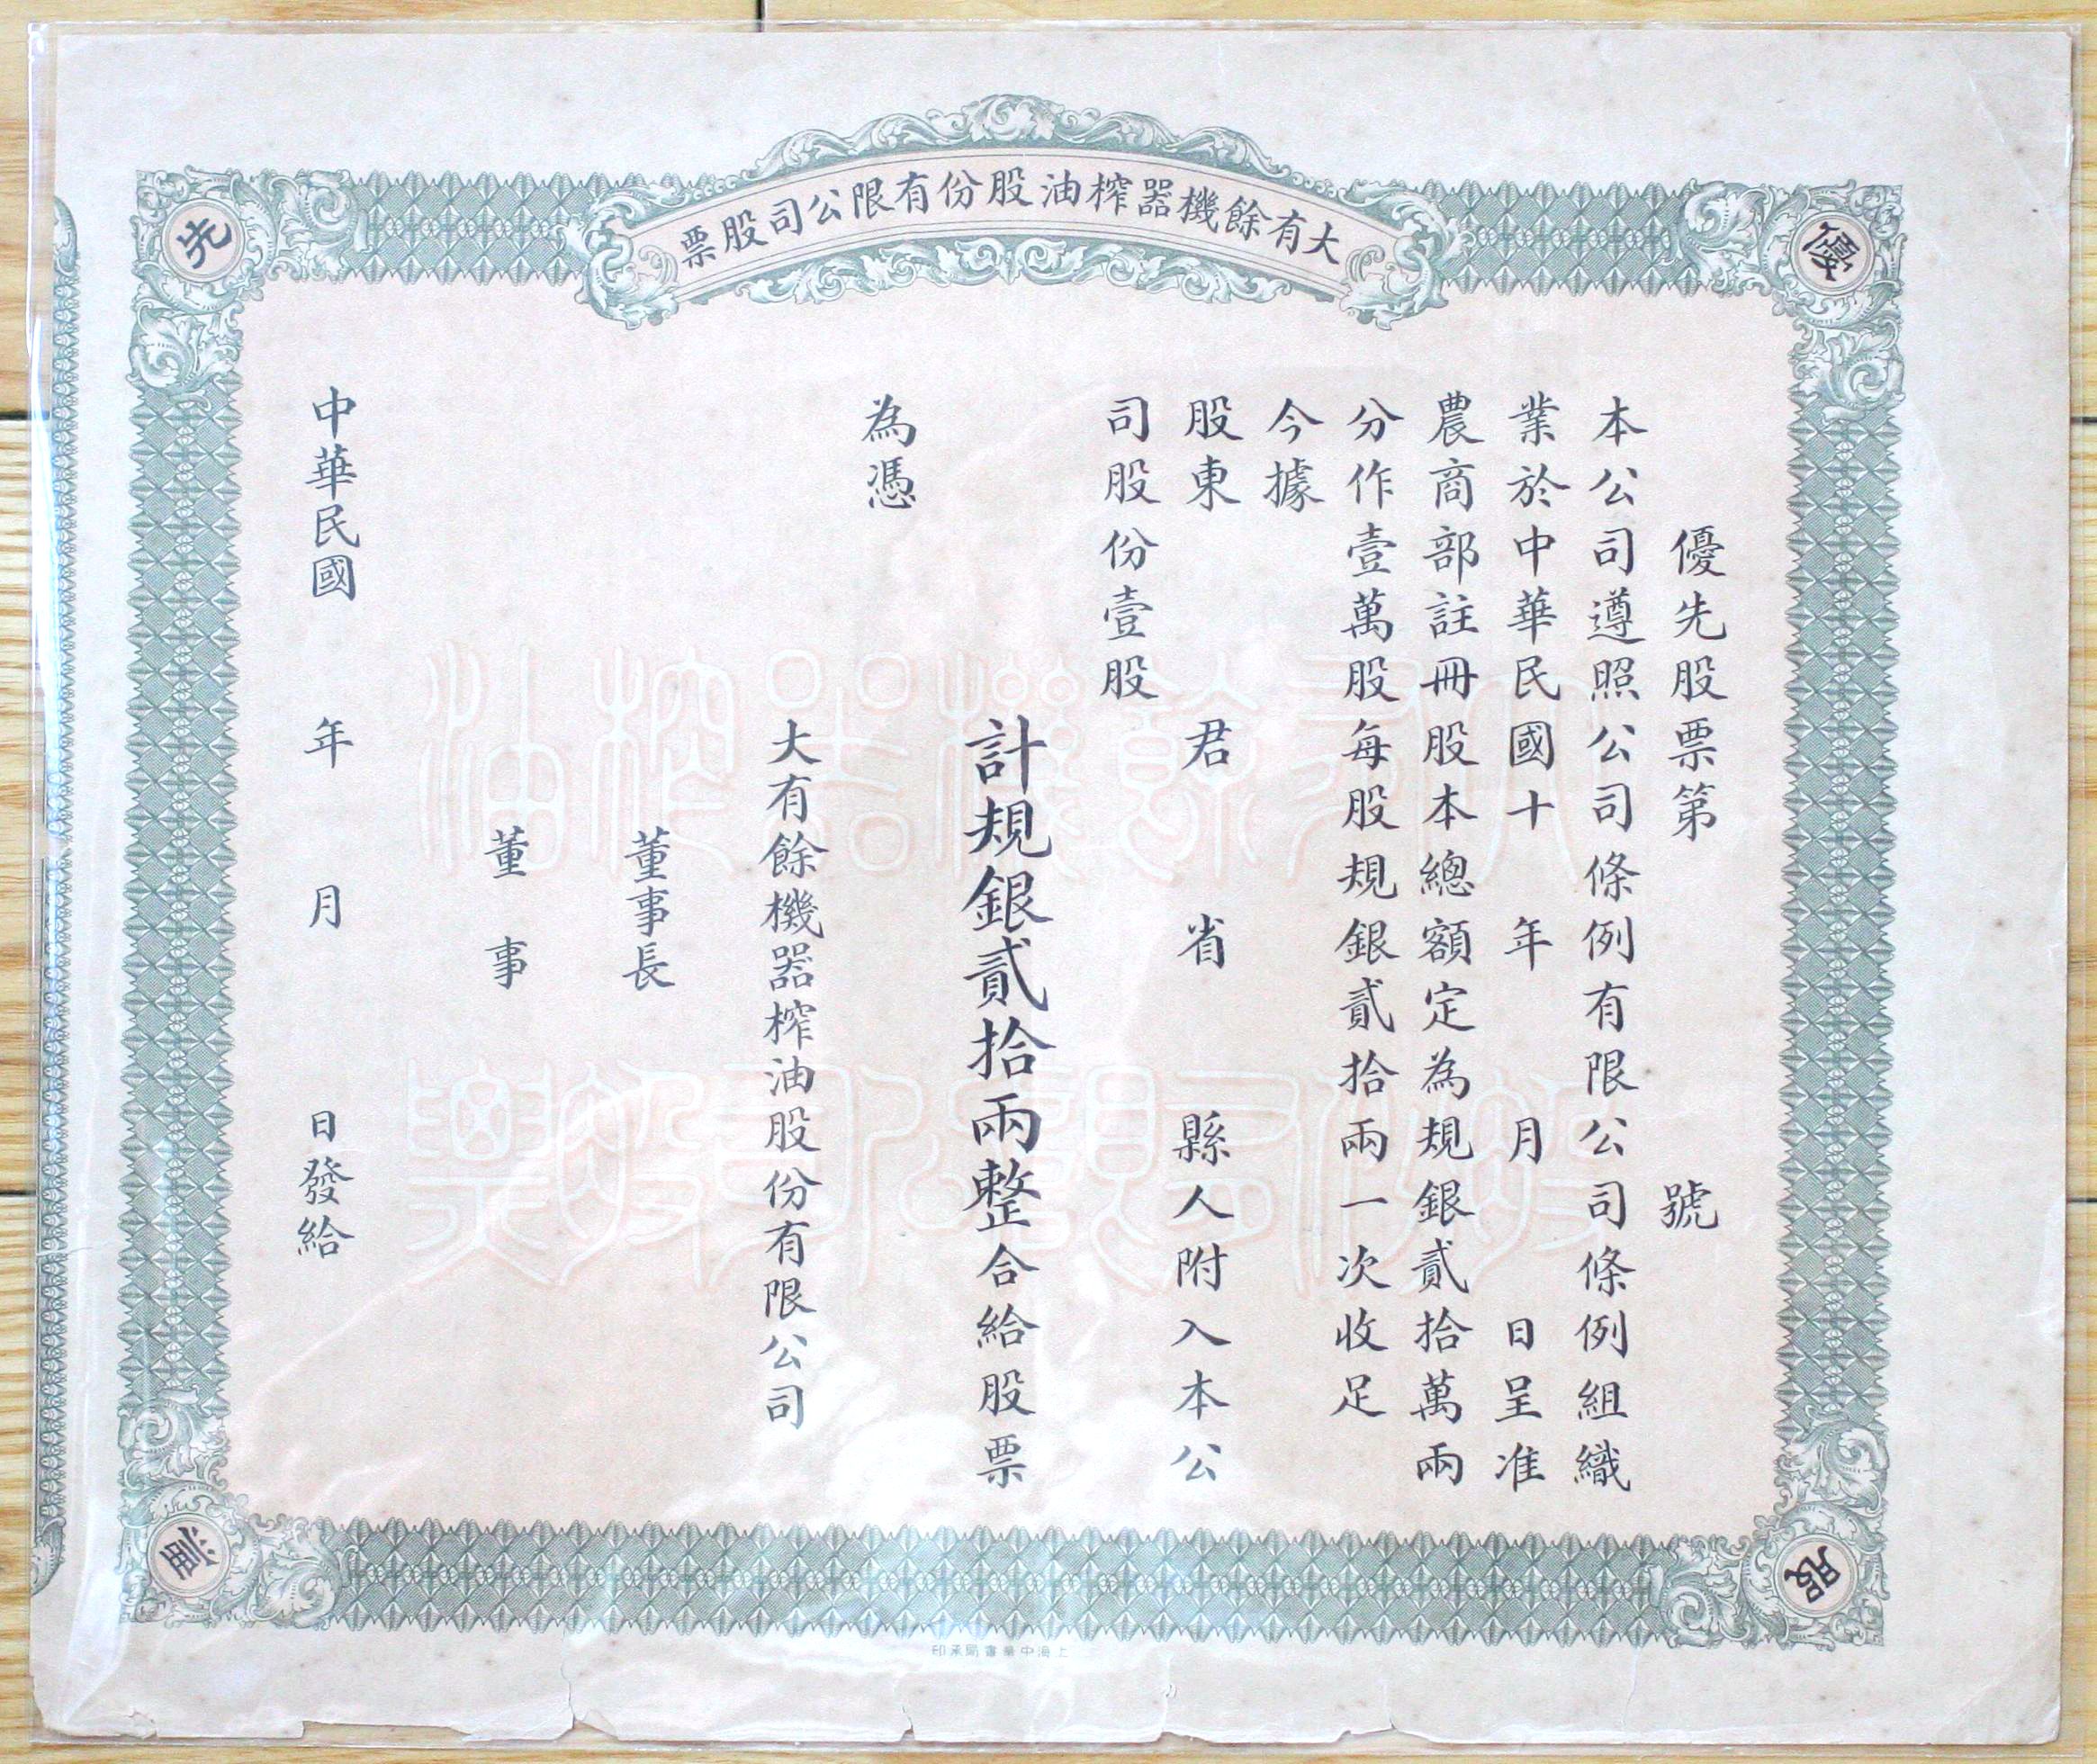 S0175, Great Shanghai Machinery Co., Usused Stock Certificate of 1930's